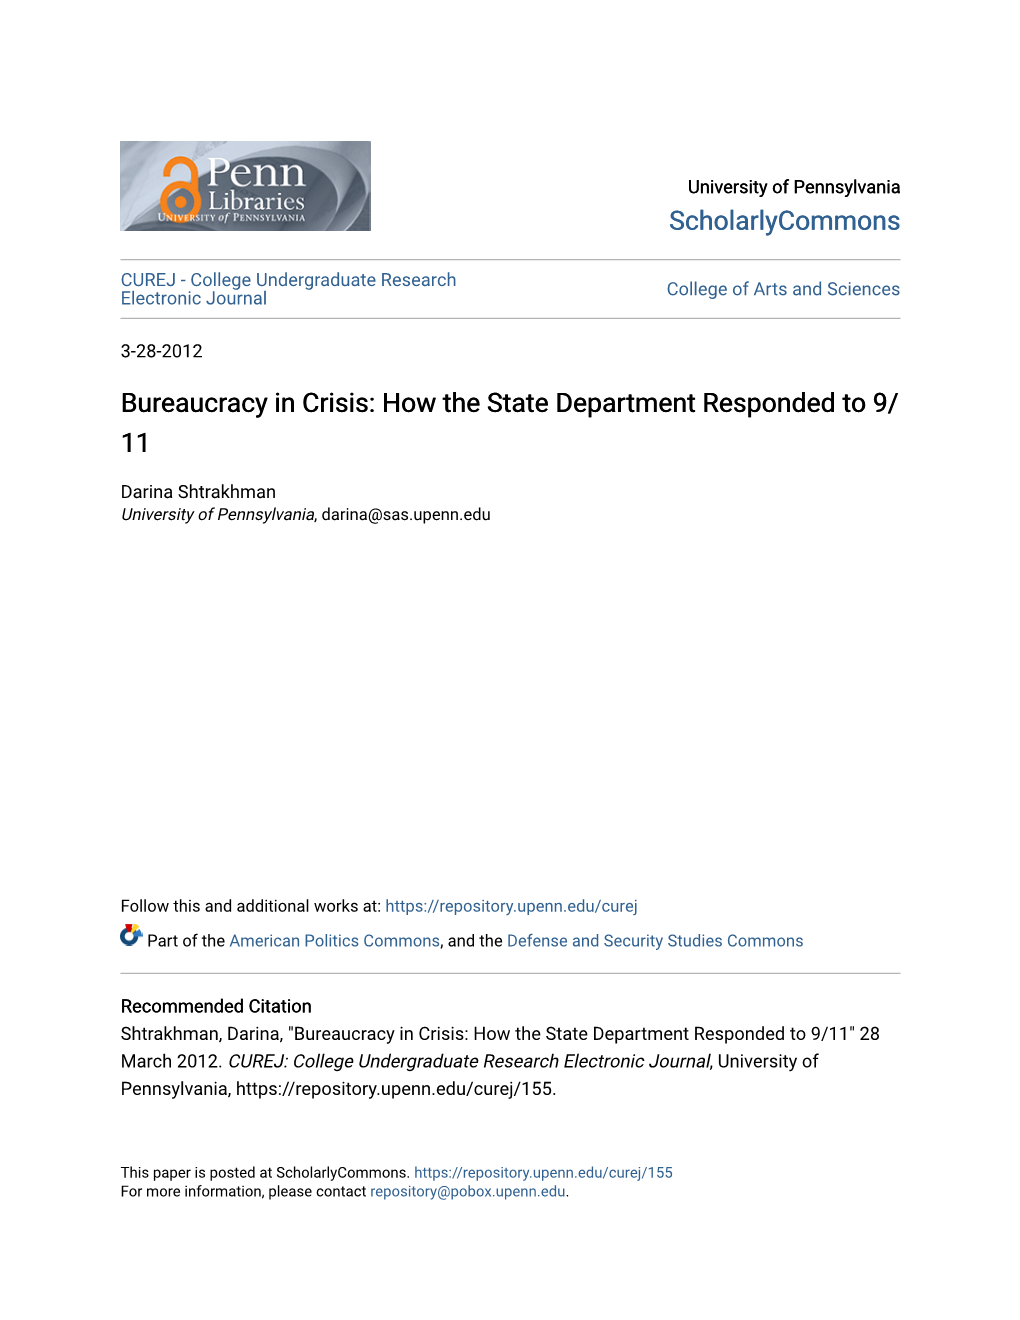 Bureaucracy in Crisis: How the State Department Responded to 9/ 11